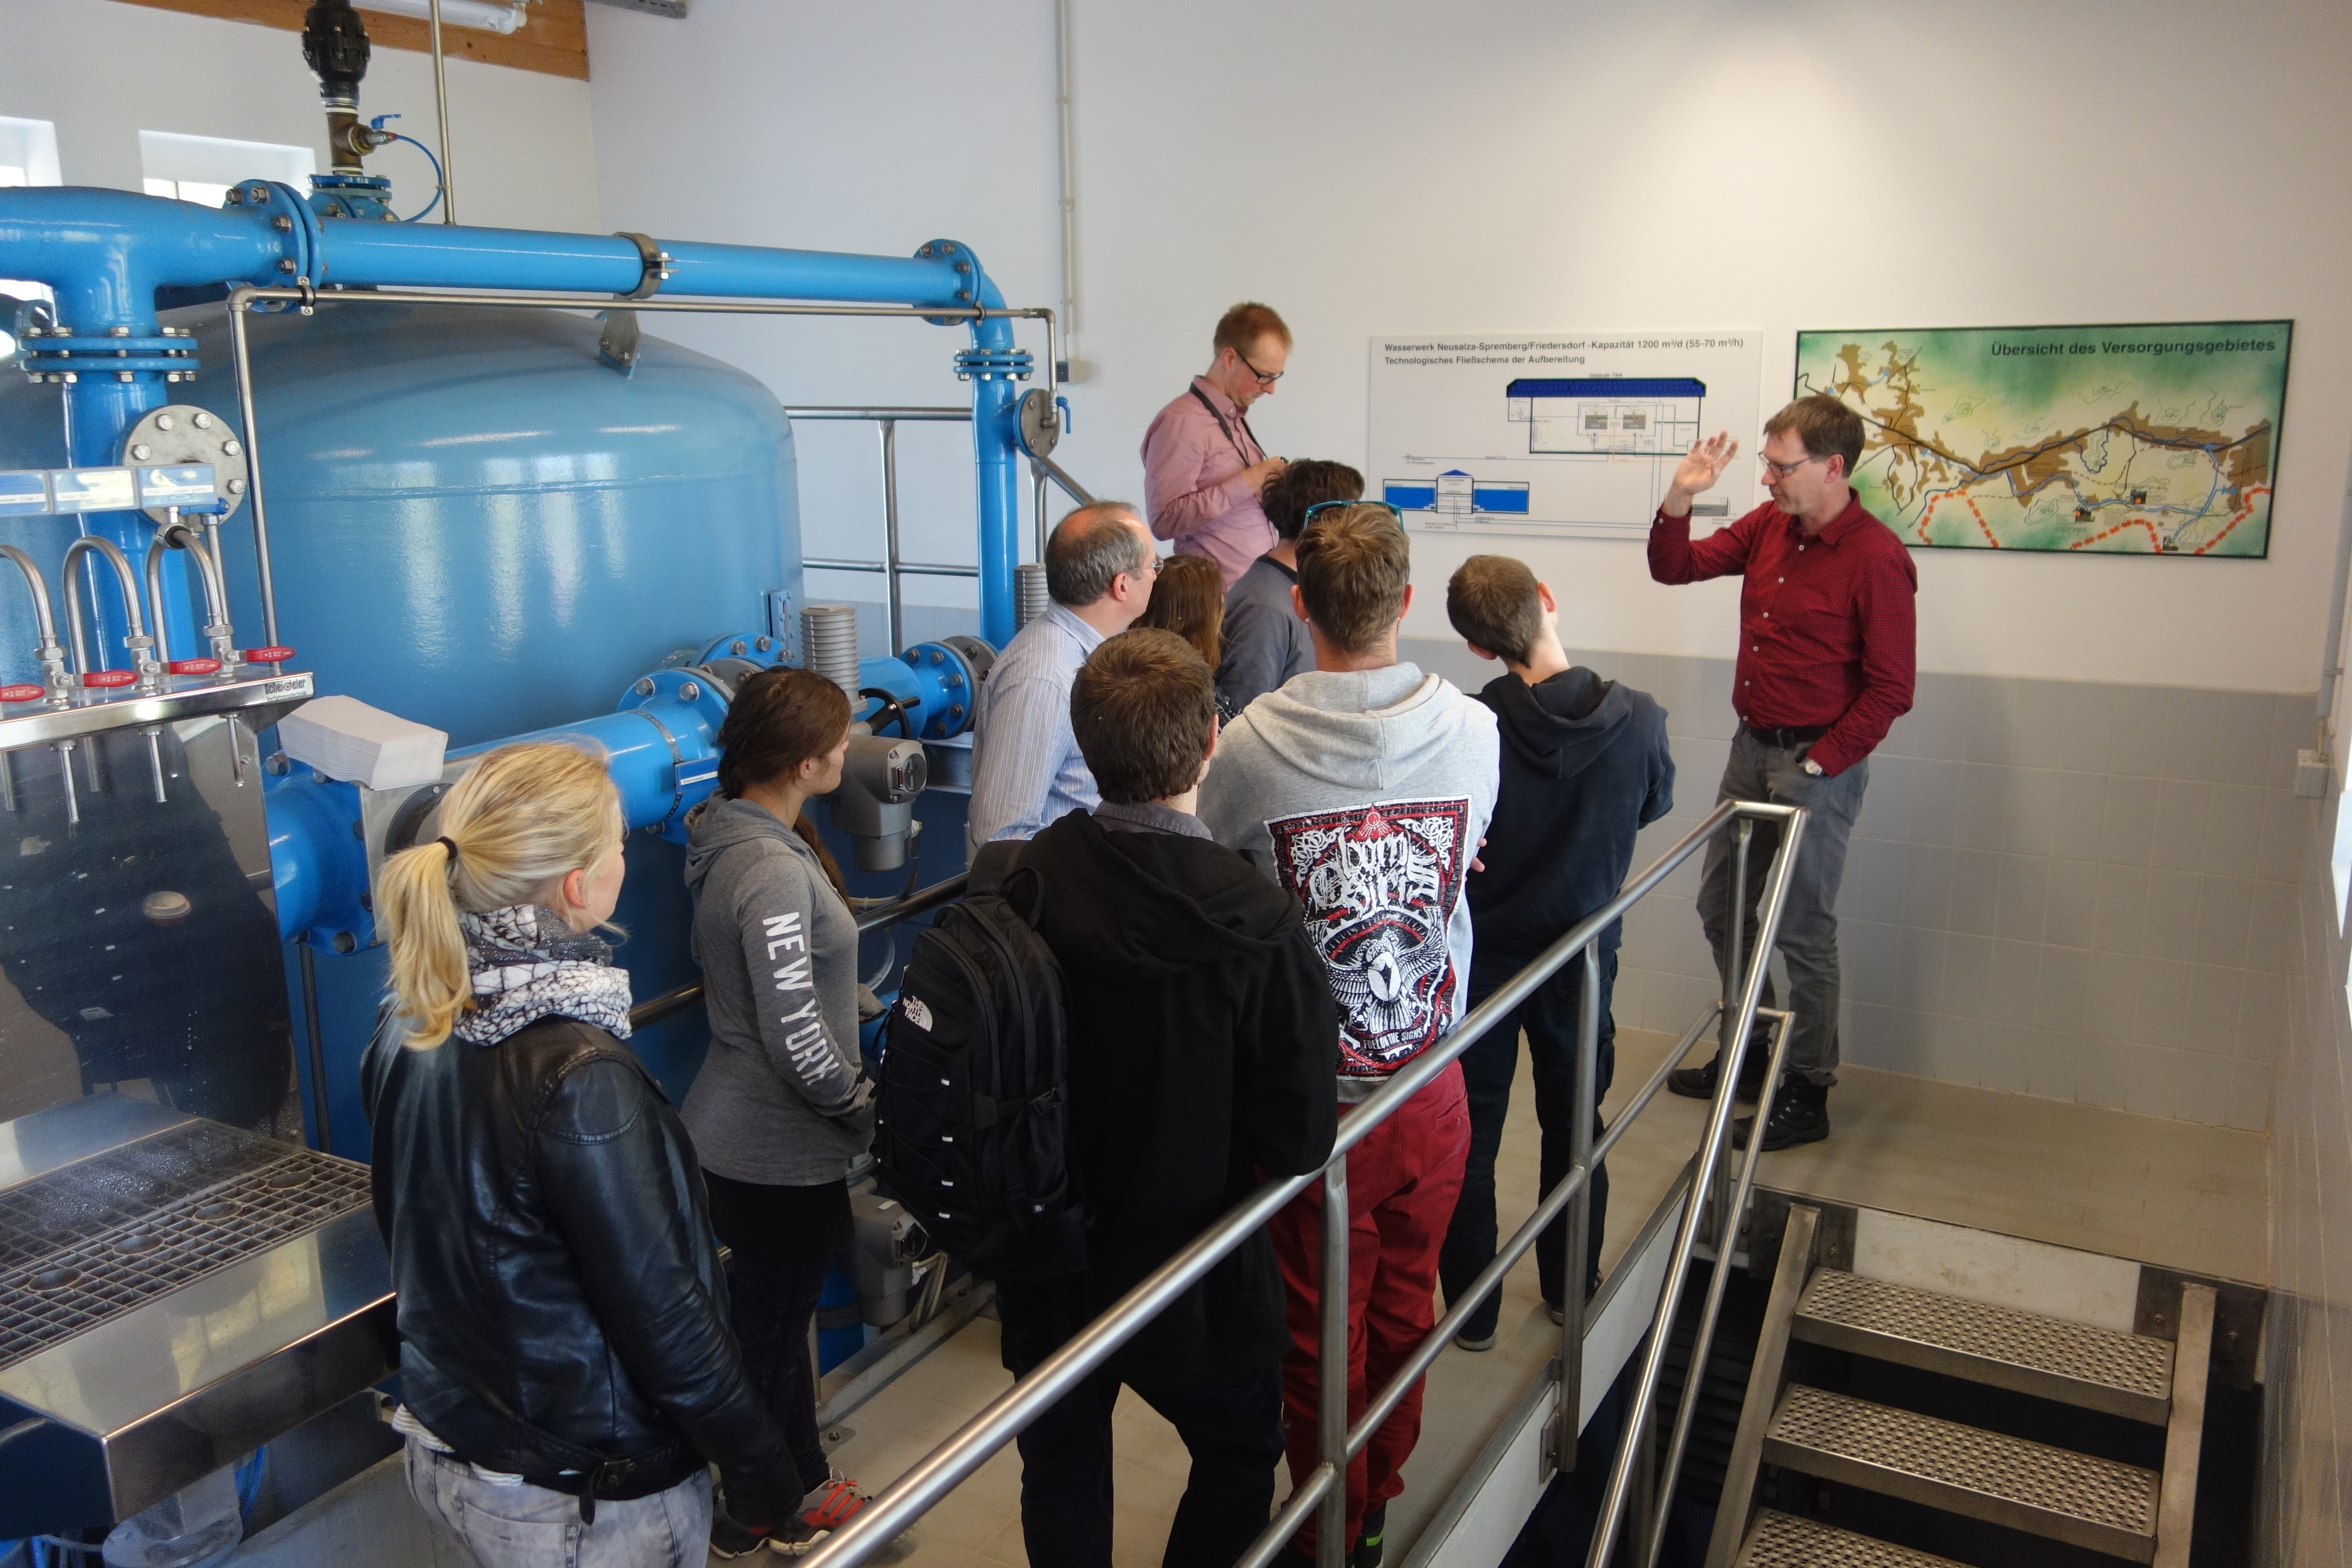 Students standing in front of water tanks in a water treatment plant